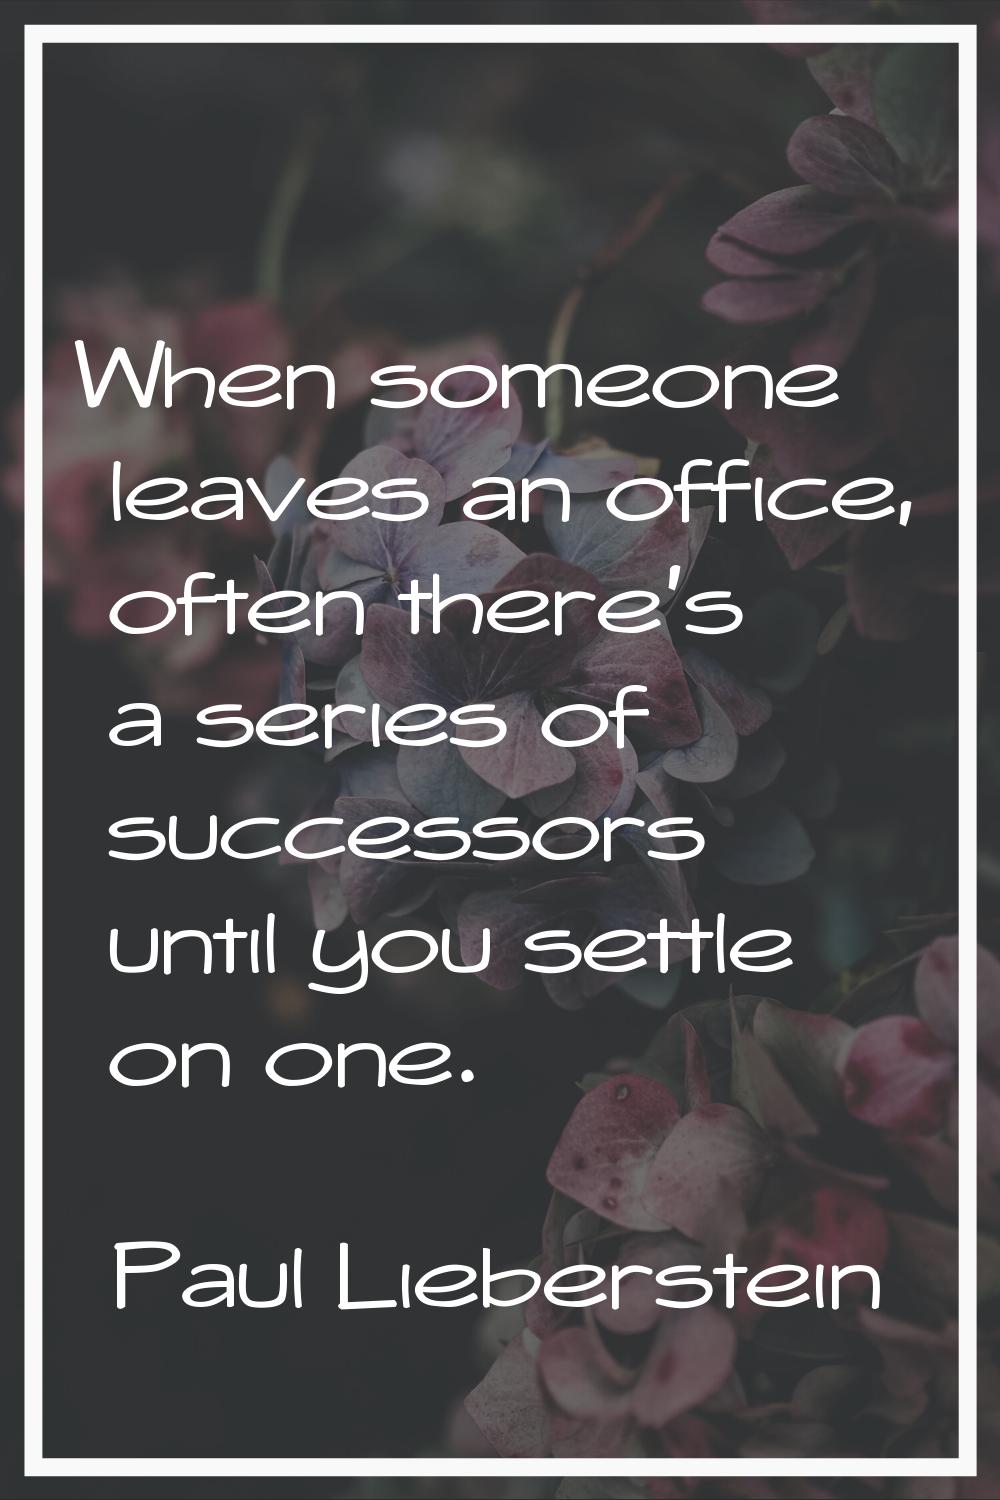 When someone leaves an office, often there's a series of successors until you settle on one.